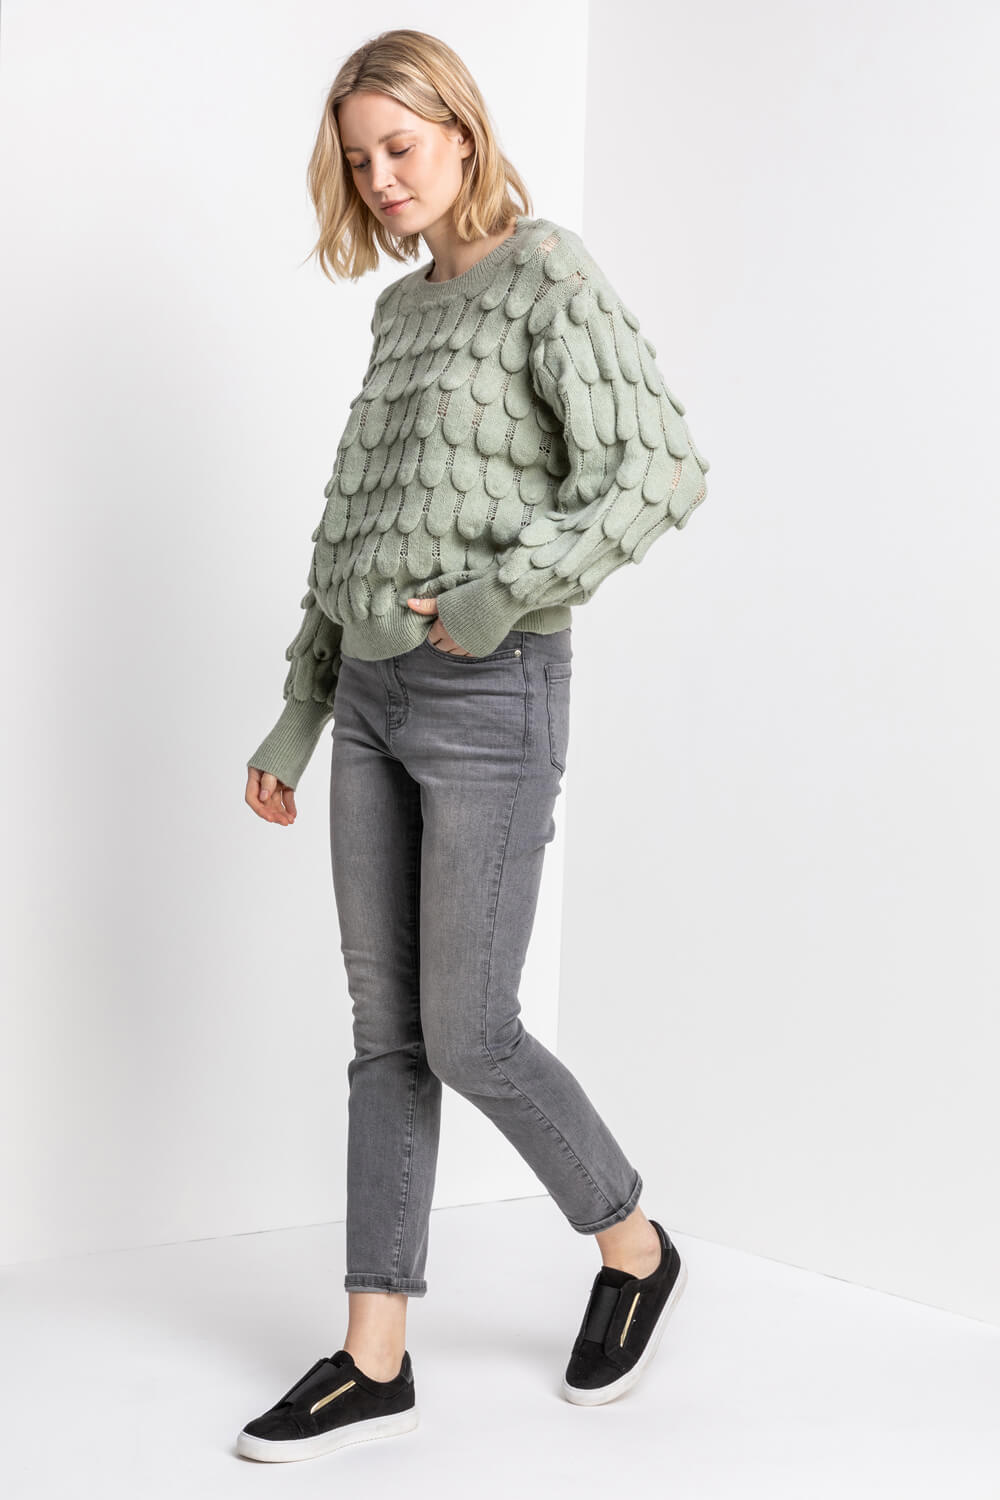 Sage Scallop Textured Knit Jumper, Image 3 of 5